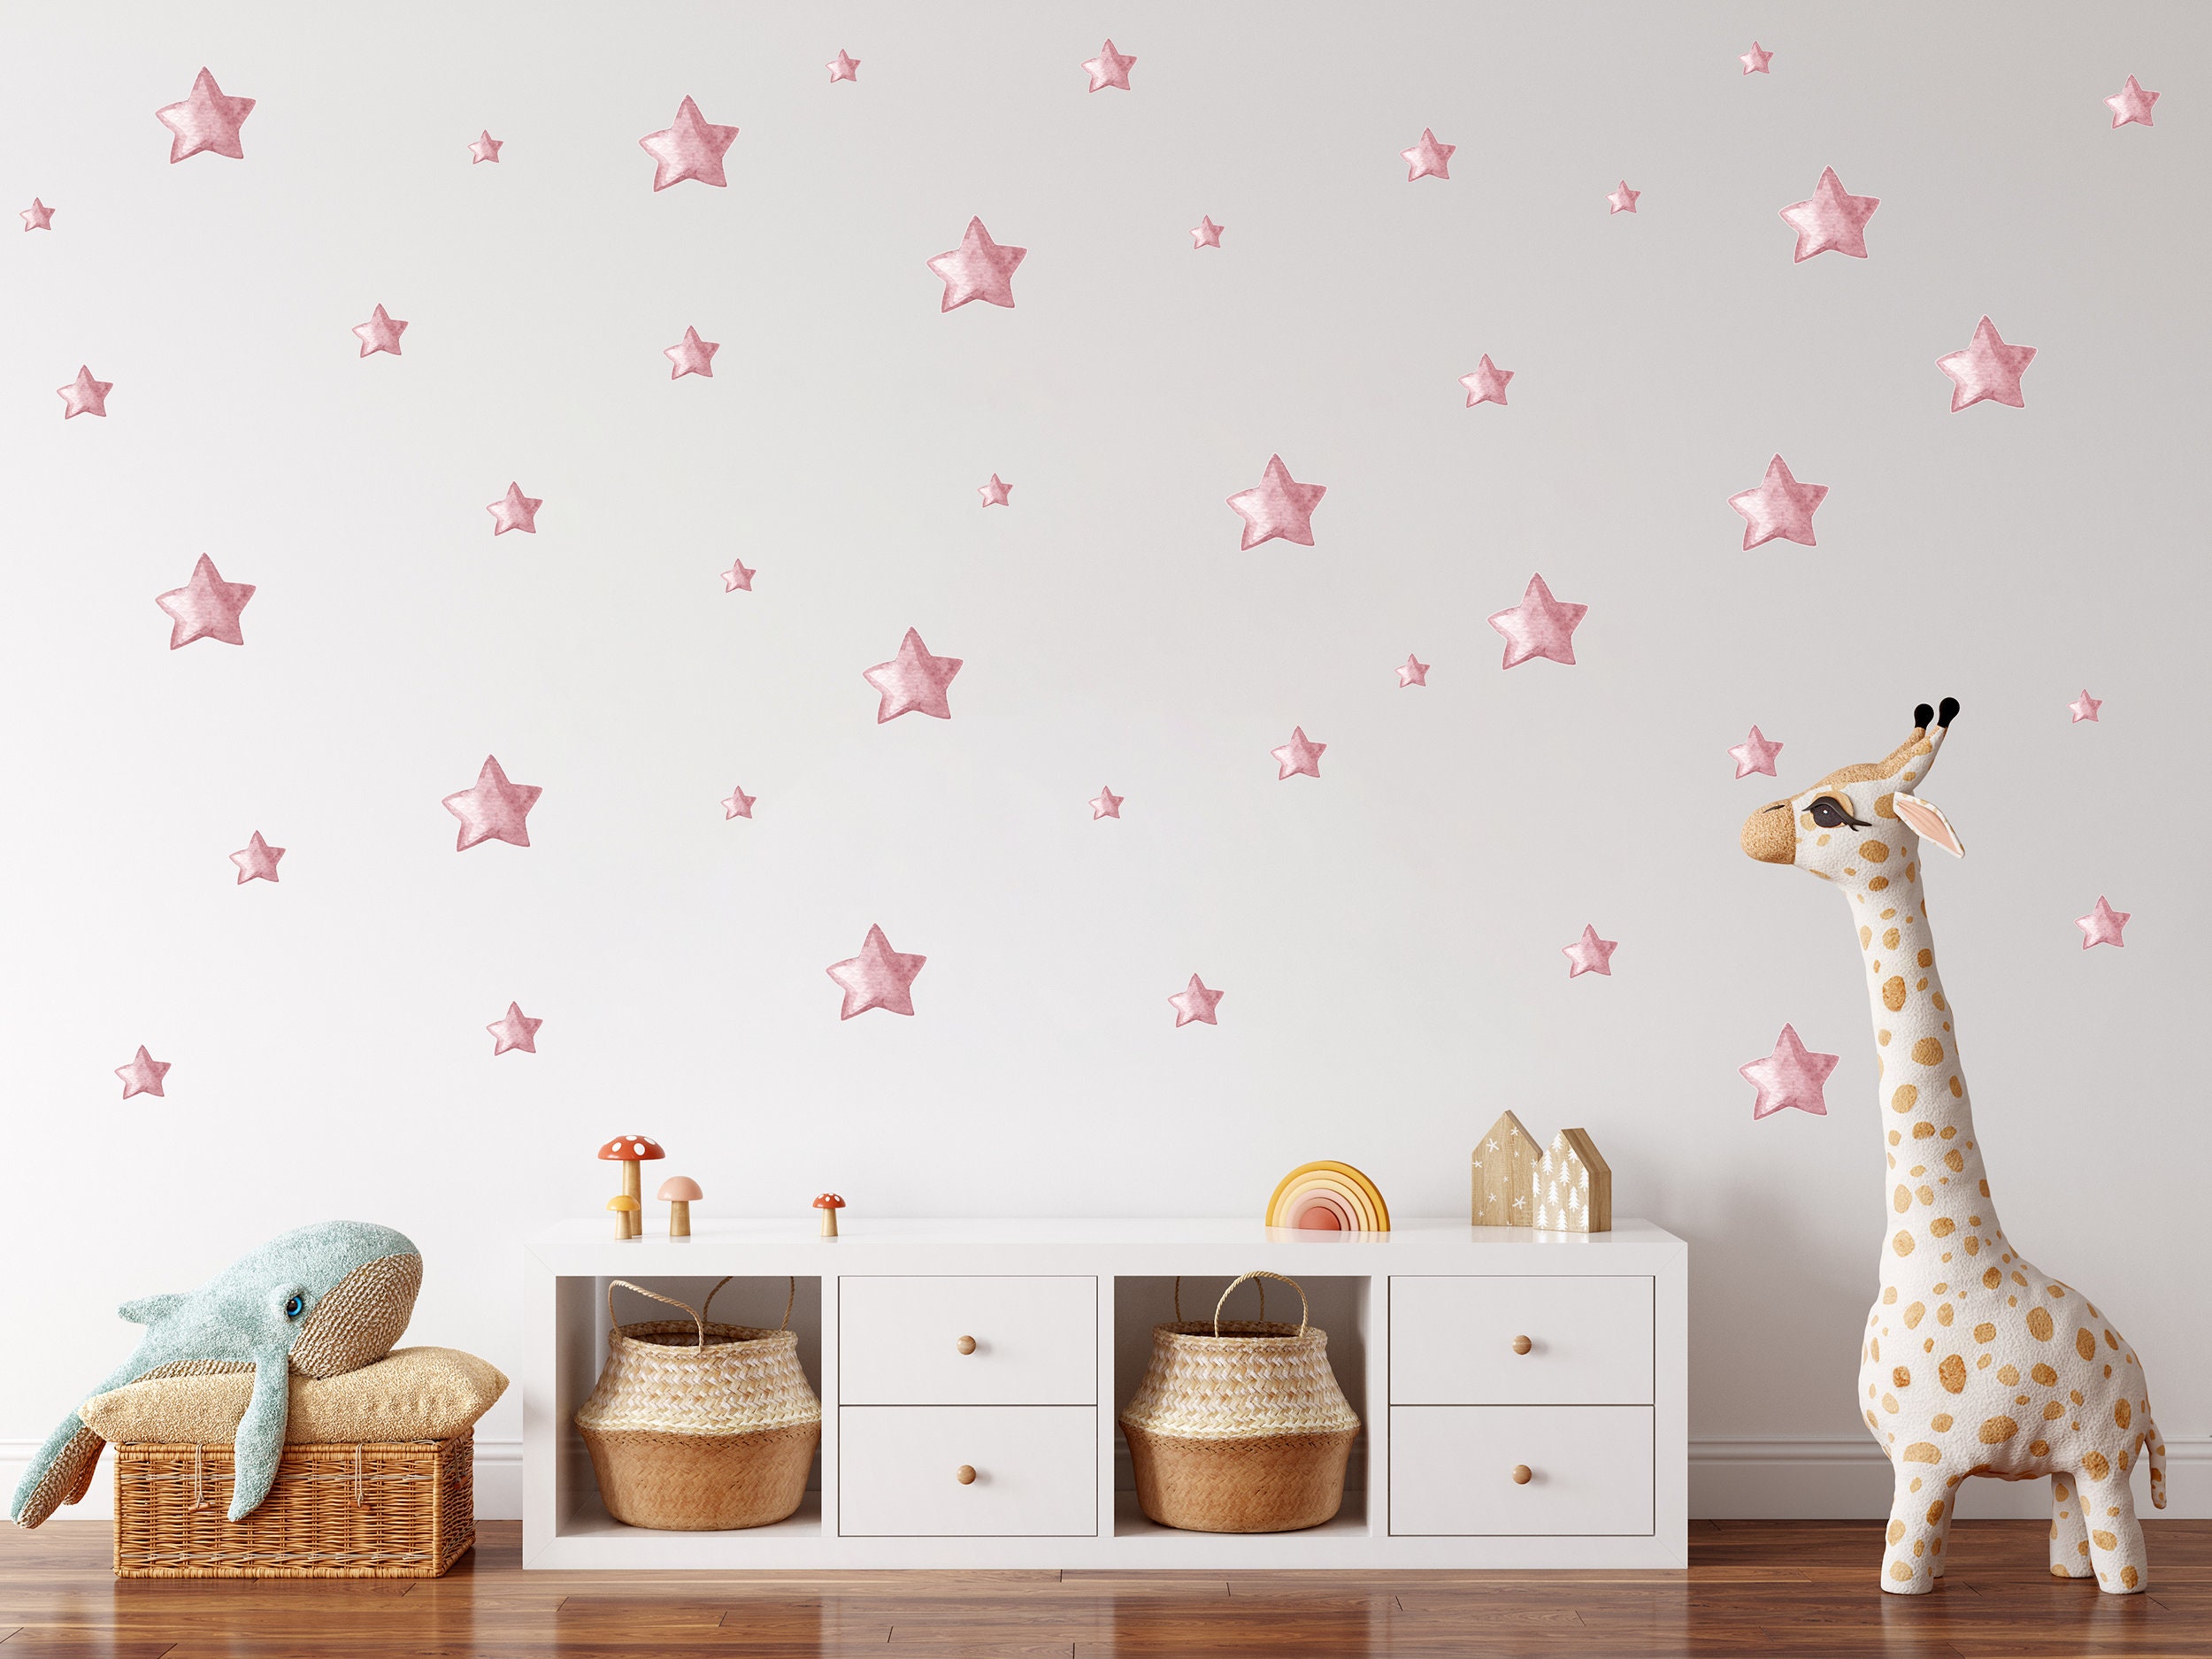 52 Hot Pink Vinyl Star Shaped Bedroom Wall Decals Stickers Stars